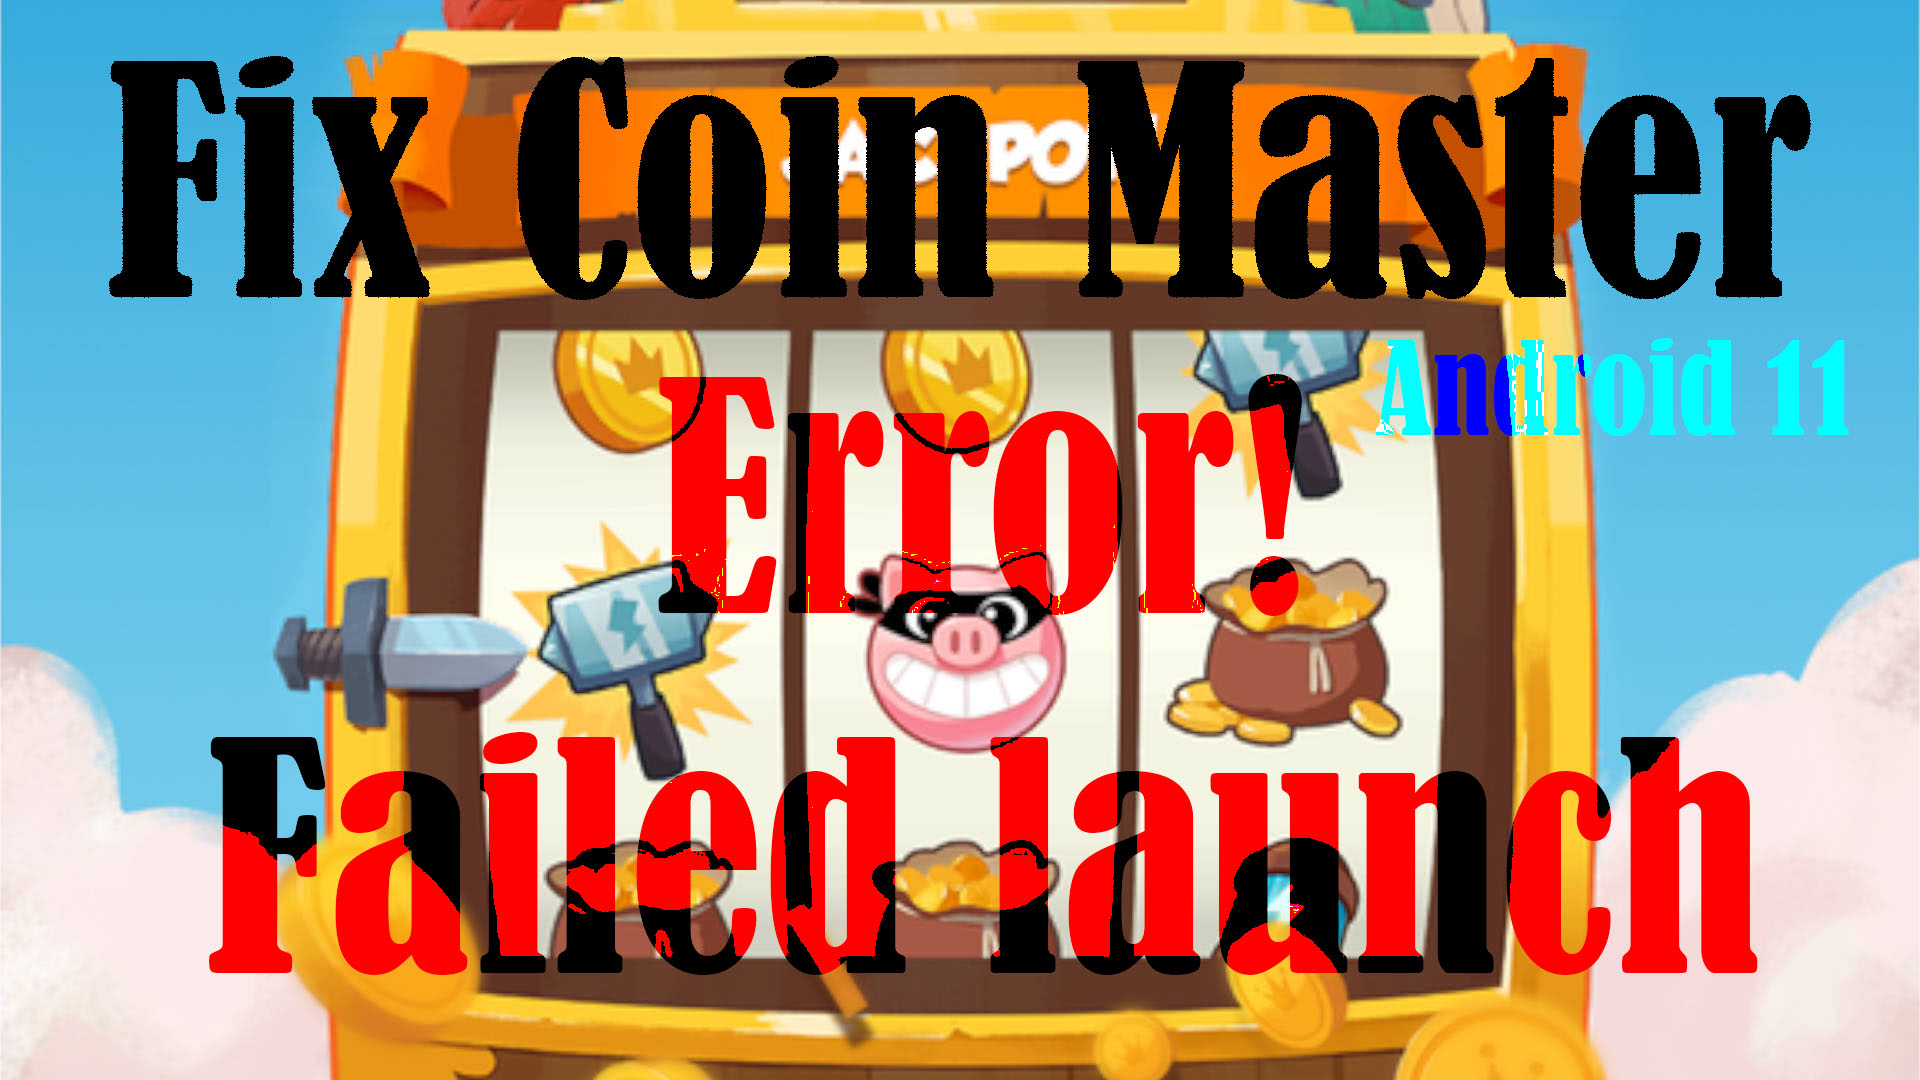 Coin Master: December 23, 2022 Free Spins and Coins link - Times of India